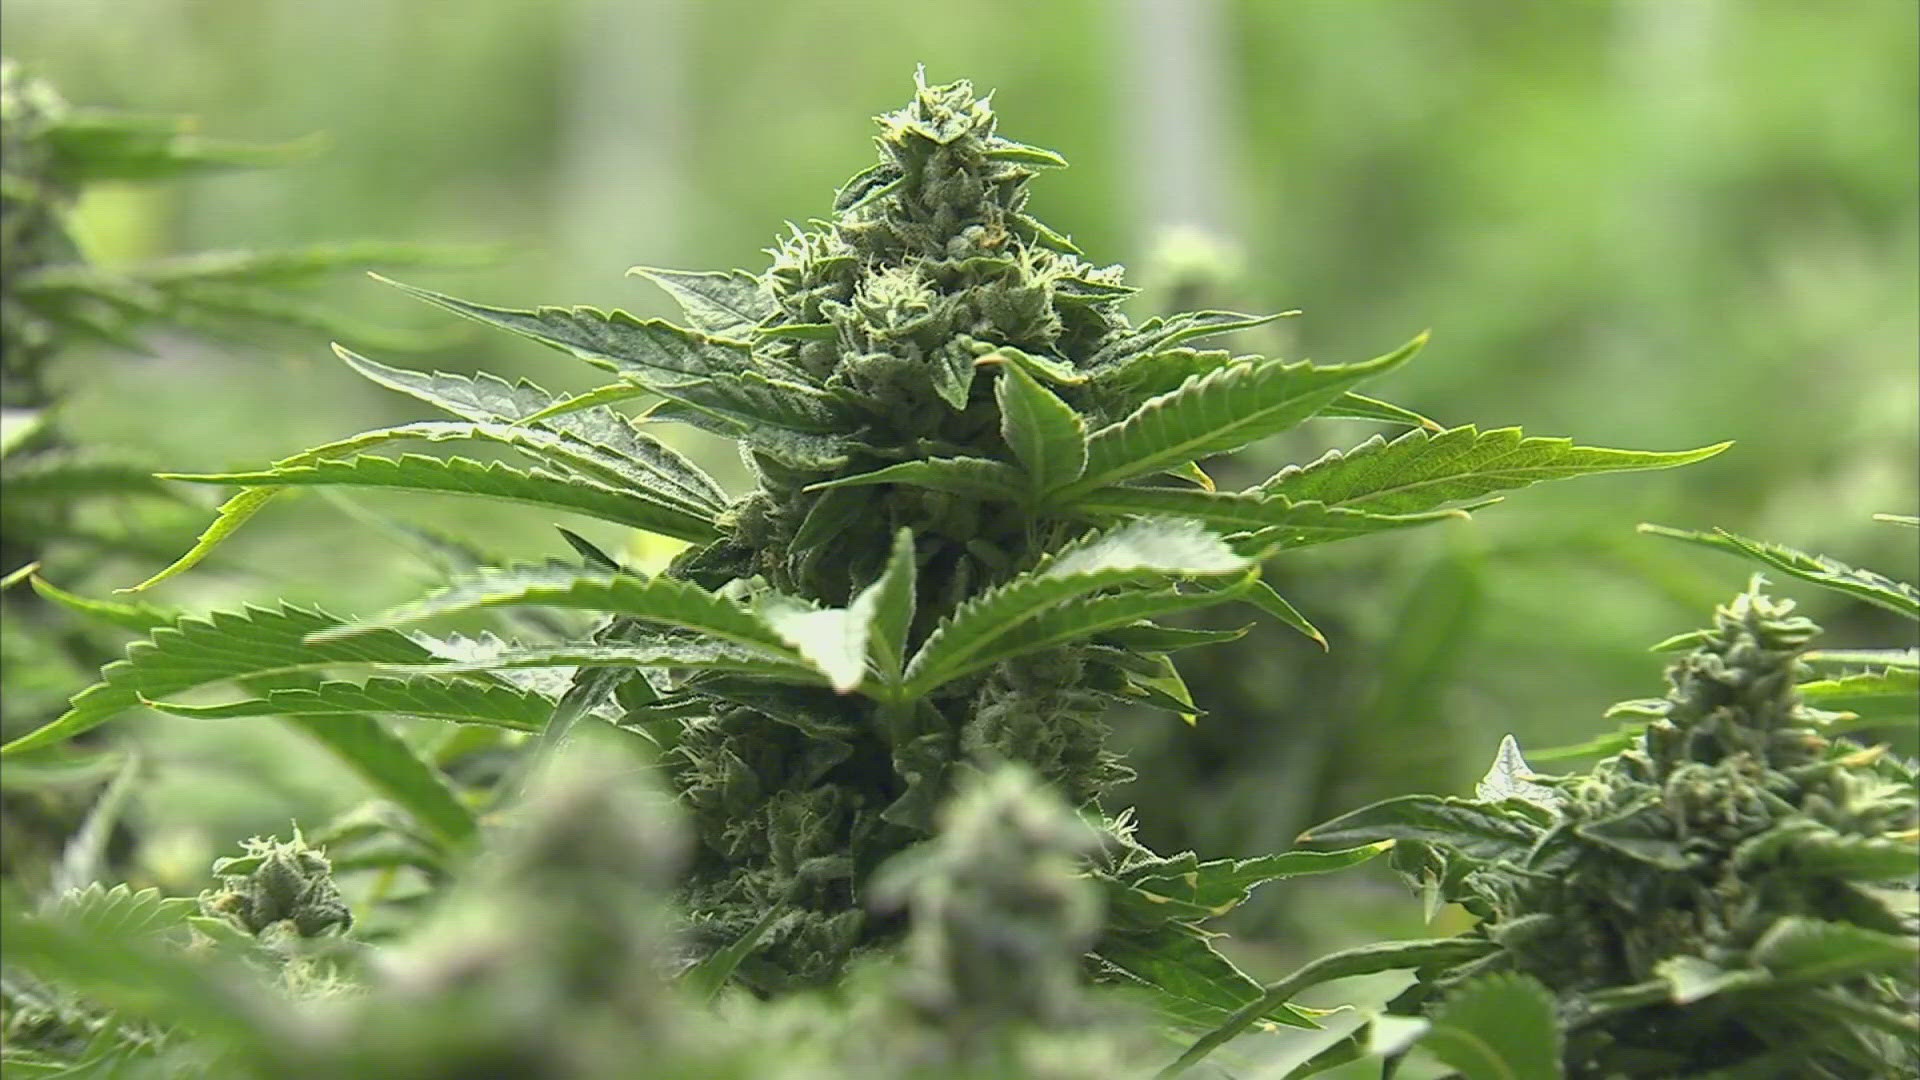 13News reporter Karen Campbell takes a look at what the DOJ reclassifying marijuana means for Indiana.